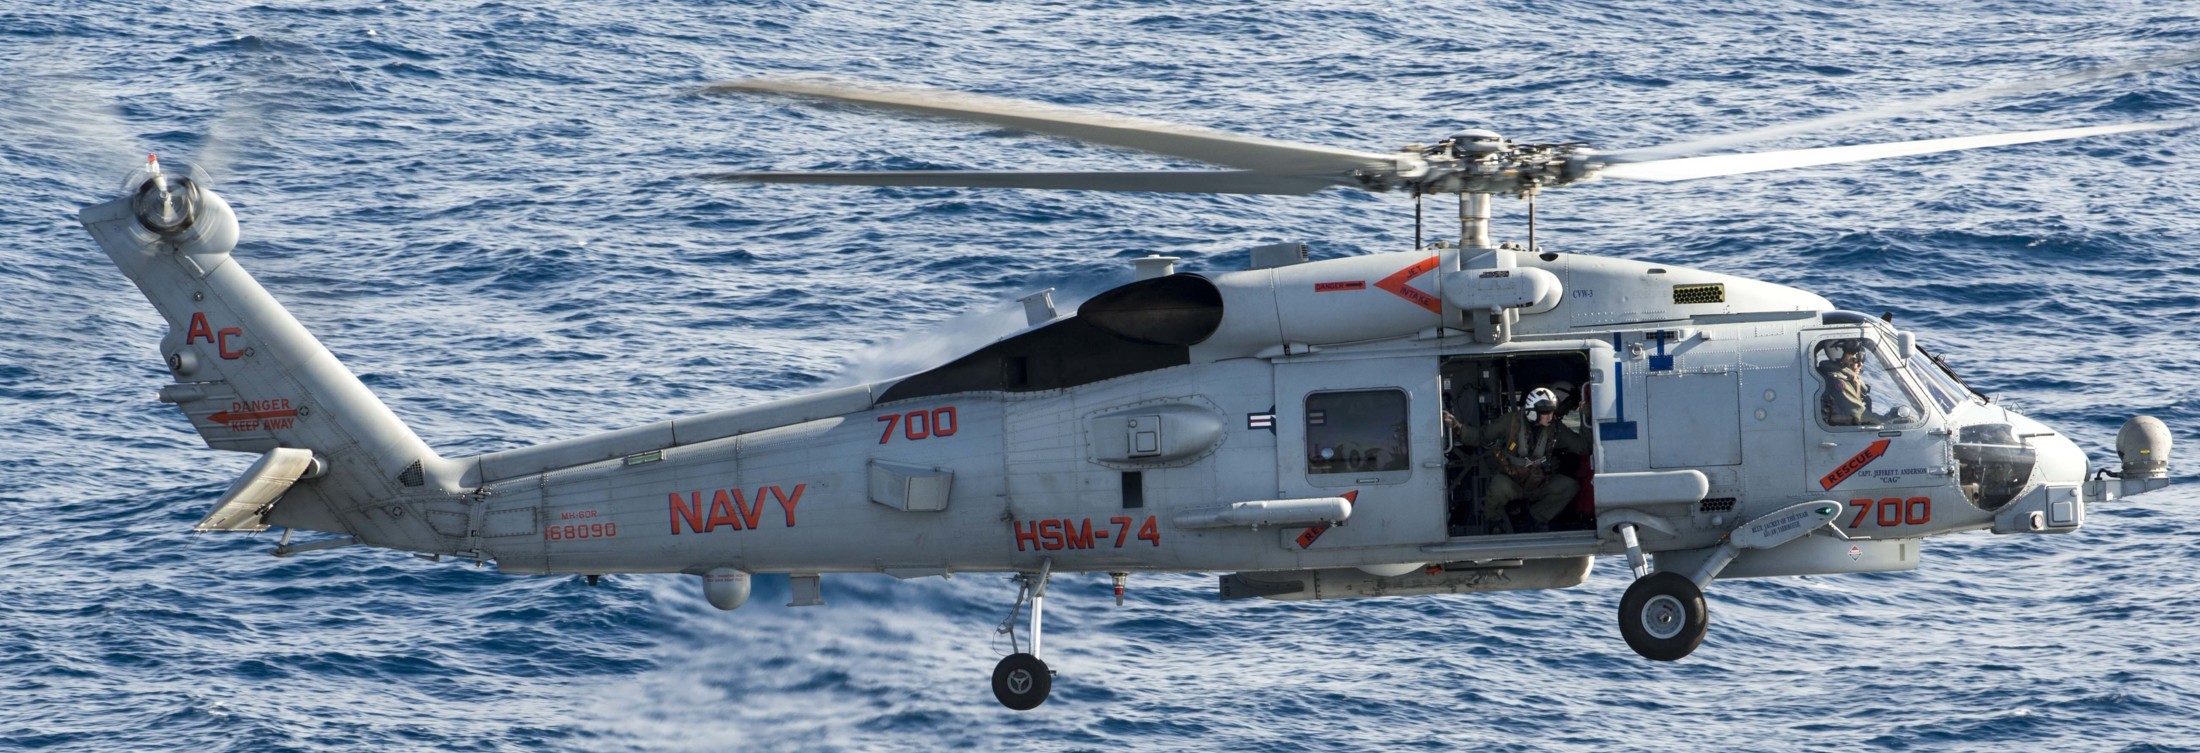 hsm-74 swamp foxes helicopter maritime strike squadron us navy mh-60r seahawk 2015 75 uss dwight d. eisenhower cvn-69